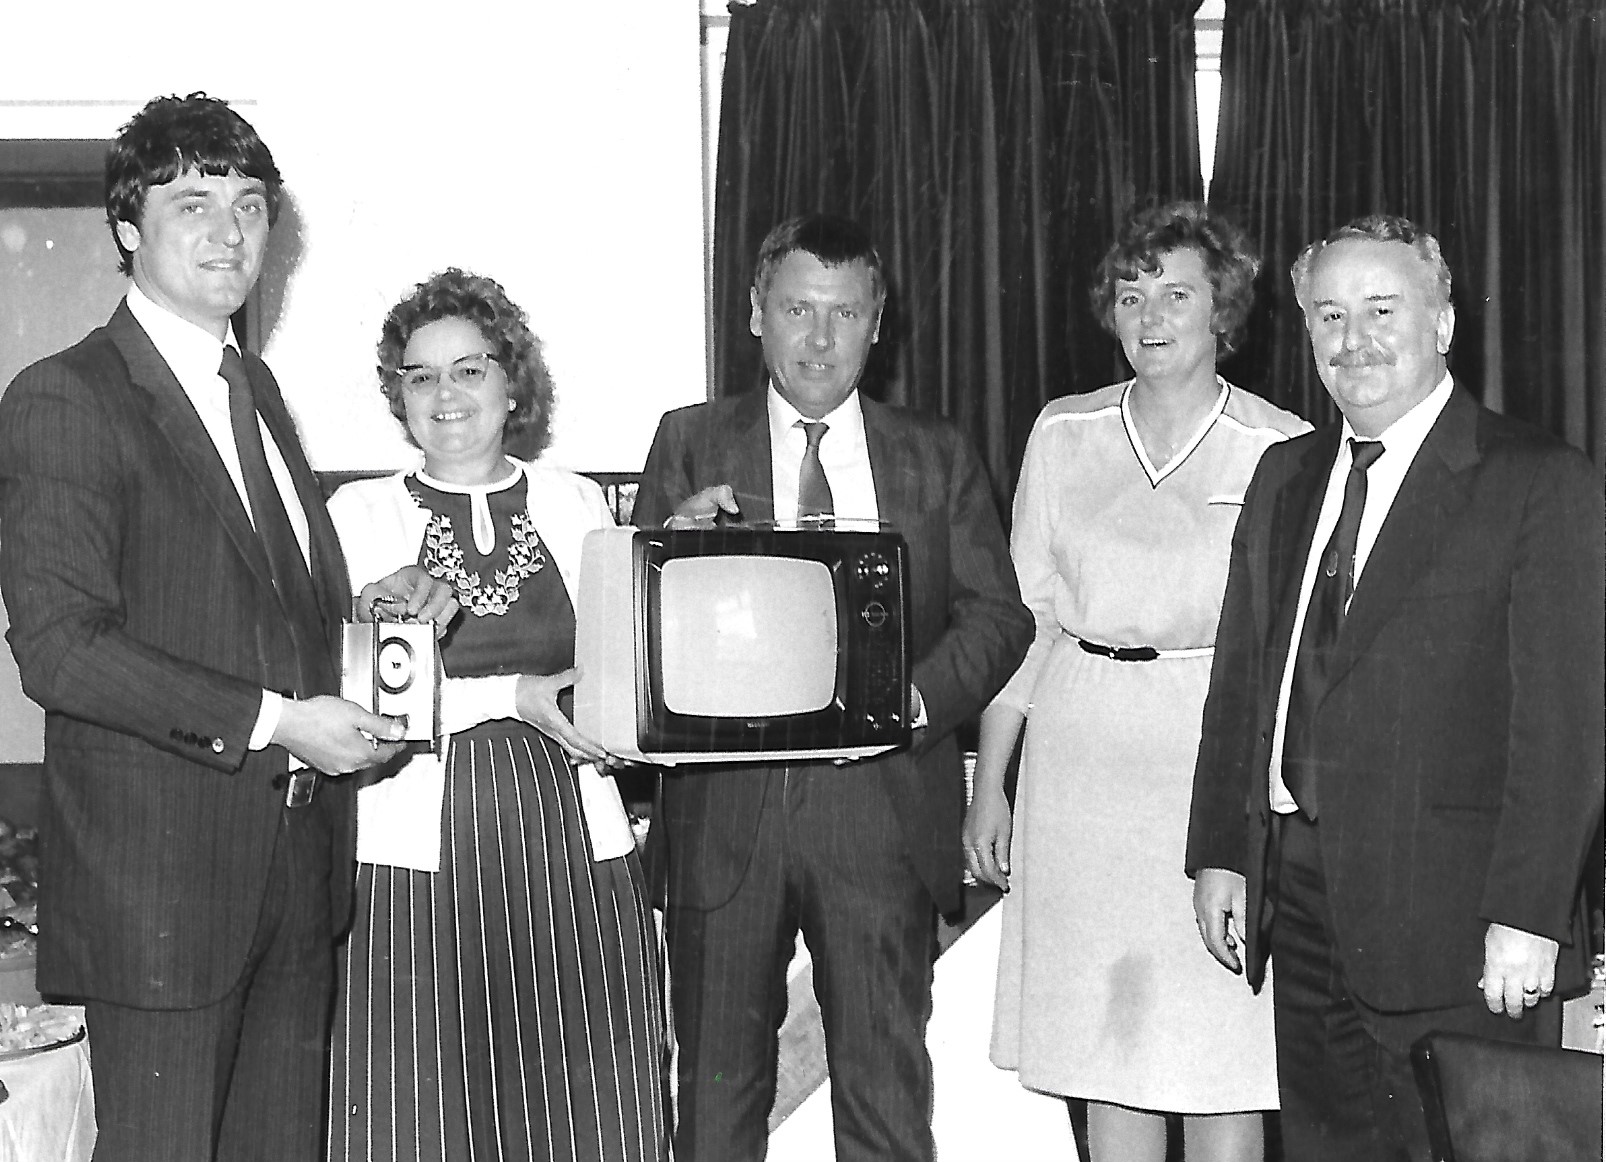 Bates Dairy in Southport holds a presentation in April 1982, with the presentation of a television set and a carriage clock